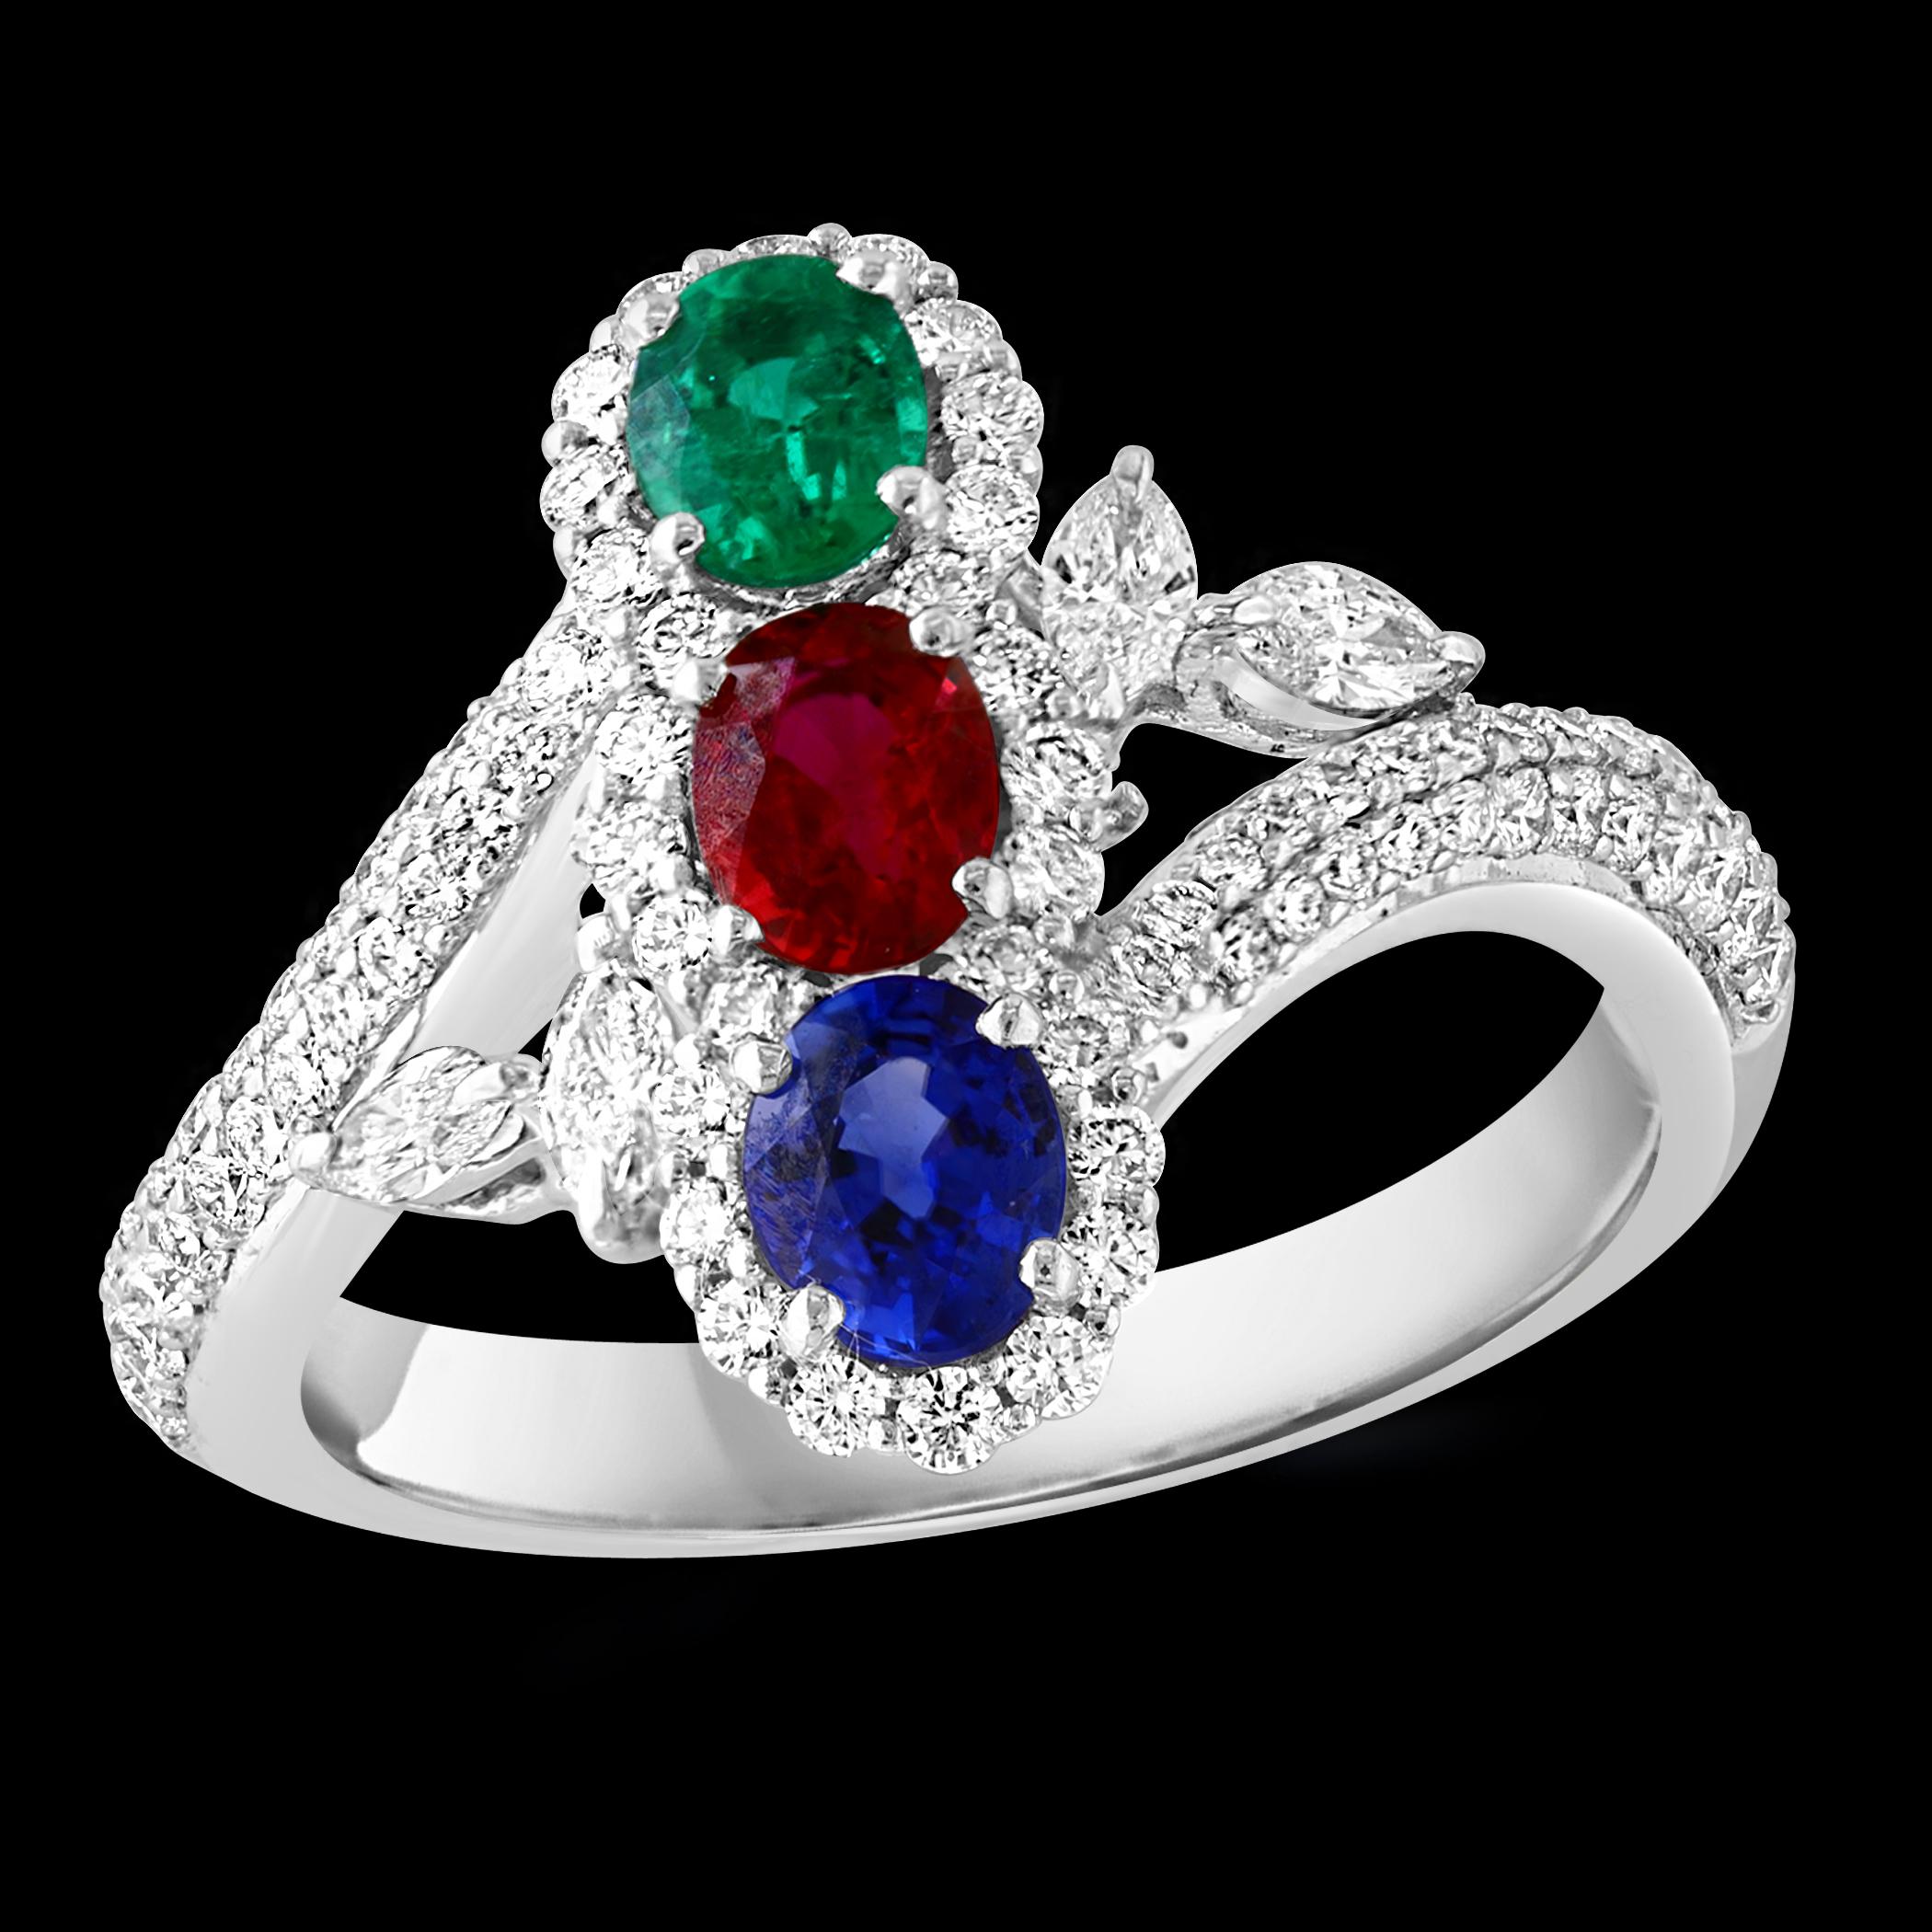 Introducing our exquisite 18 Karat Gold Ring, featuring a stunning 1.2 carat natural oval Ruby, Emerald, and Sapphire along with approximately 1.5 carats of brilliant cut diamonds. This ring is a true testament to beauty and elegance. The natural